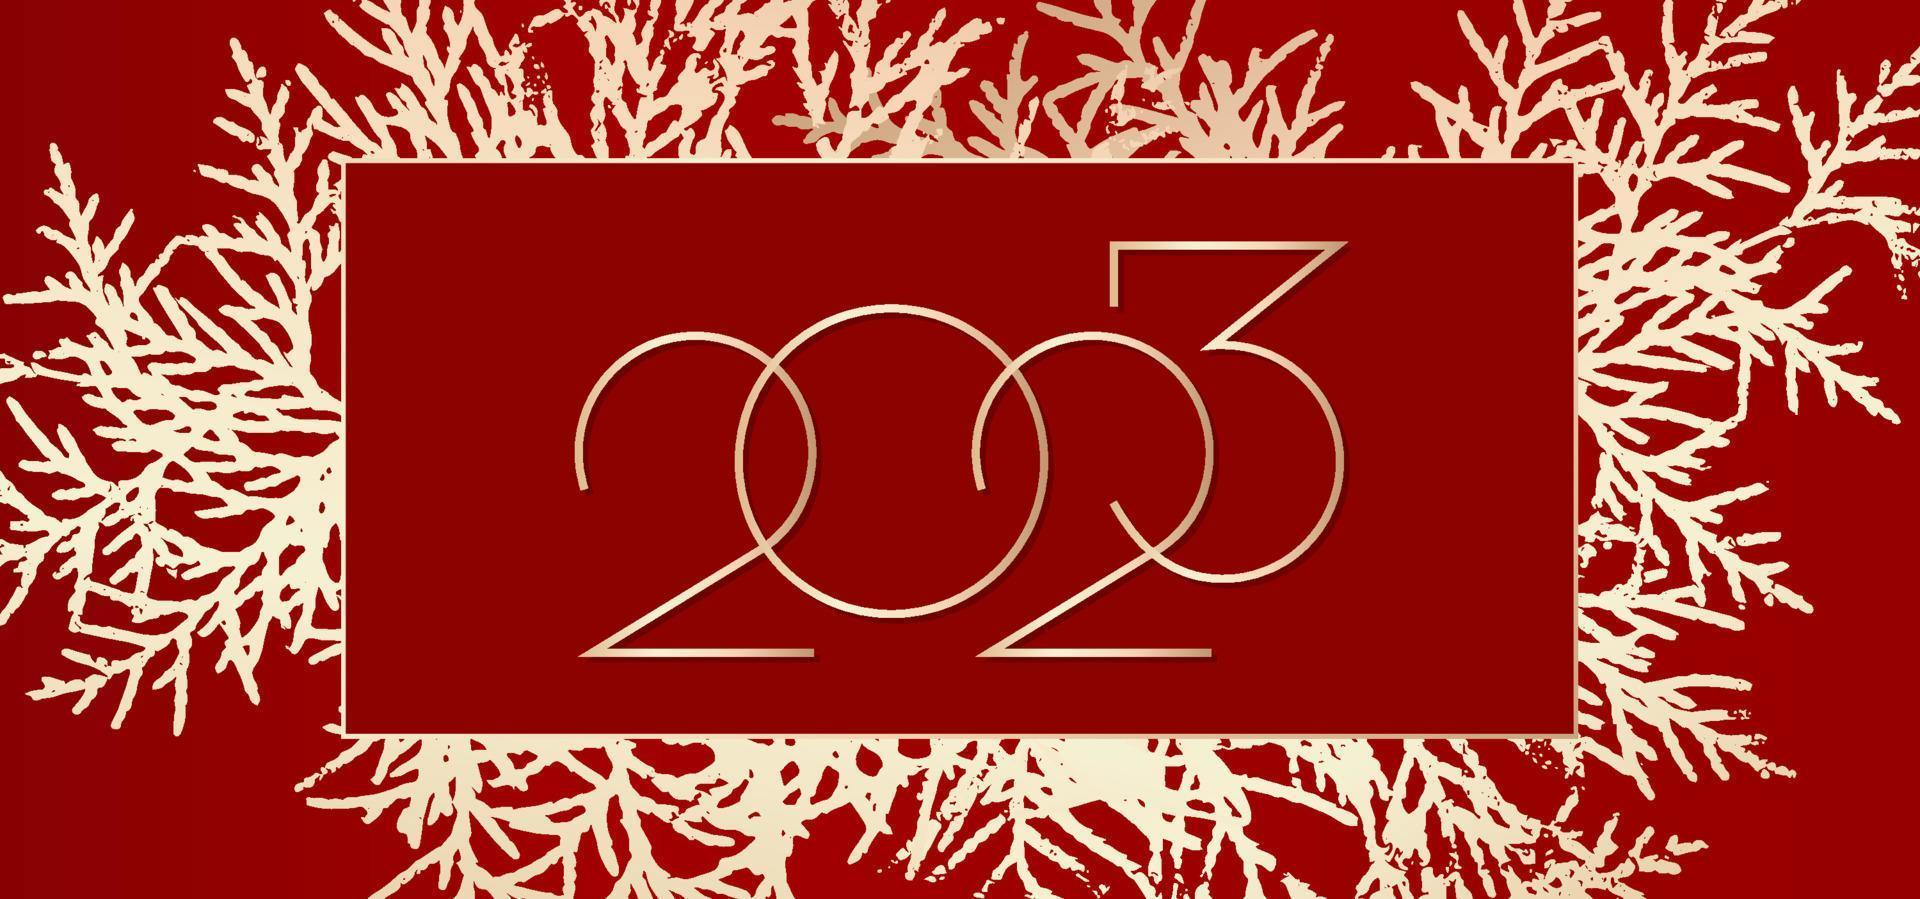 2023 Happy New Year Background Design. Red background with gold christmas tree. Greeting Card, Banner, Poster. Vector Illustration.